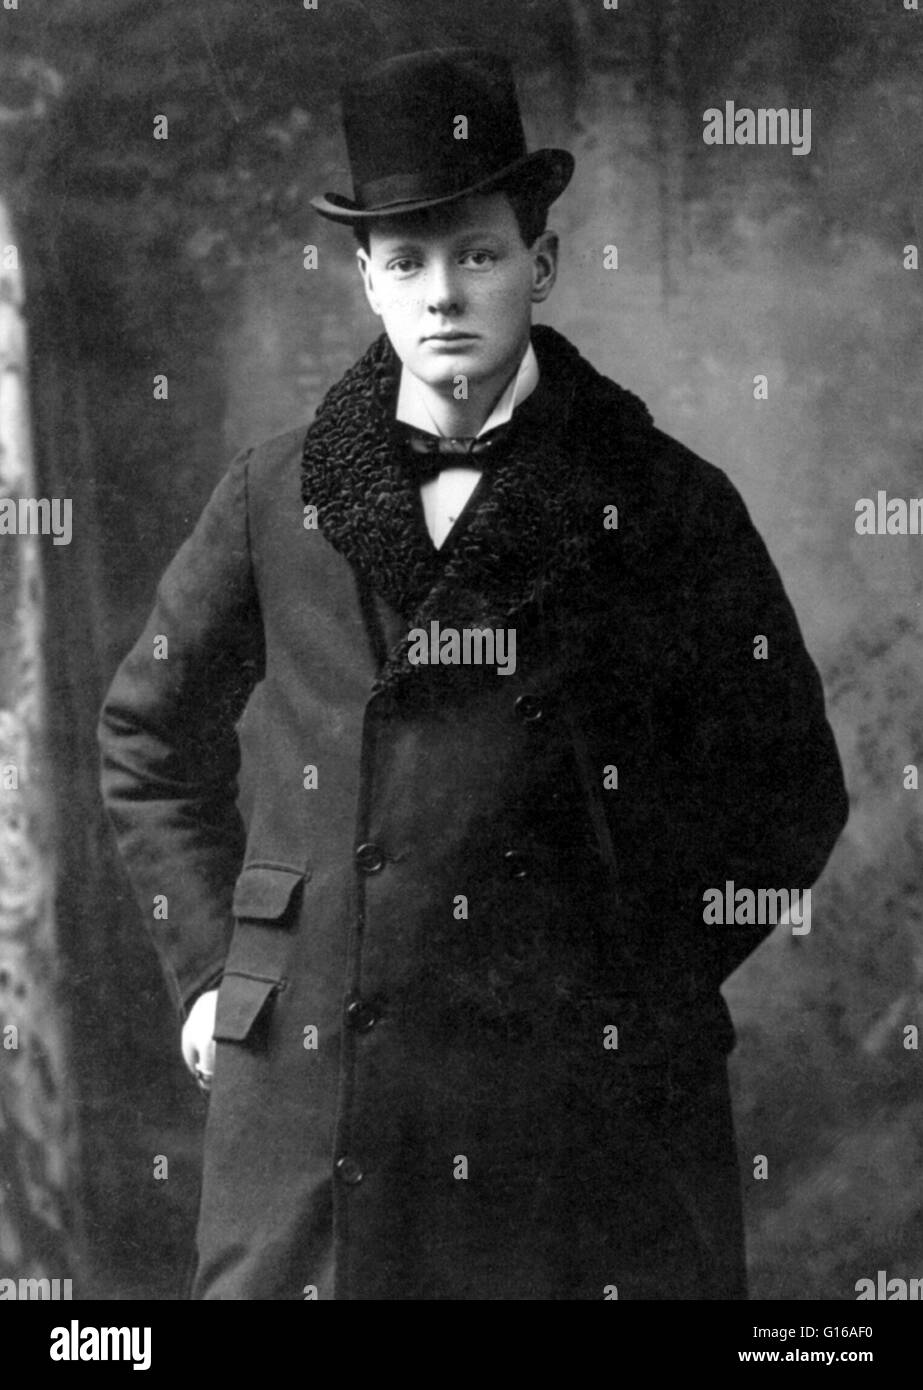 Churchill wearing hat and overcoat, circa 1900. Winston Leonard Spencer-Churchill (November 30, 1874 - January 24, 1965) was a British politician who was Prime Minister of the United Kingdom from 1940 to 1945 and again from 1951 to 1955. Widely regarded a Stock Photo